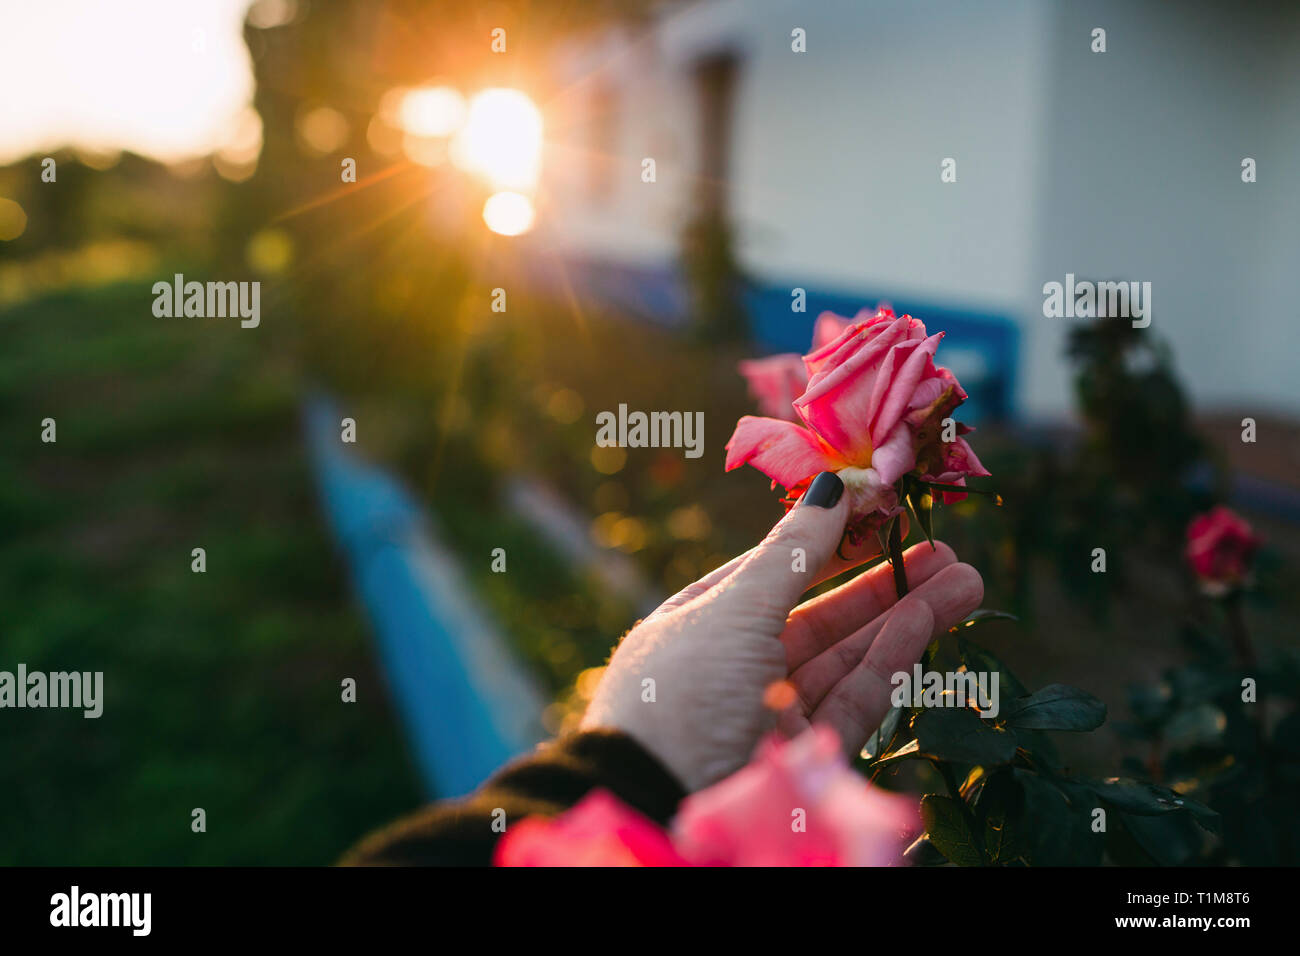 Personal perspective woman picking pink rose in garden Stock Photo